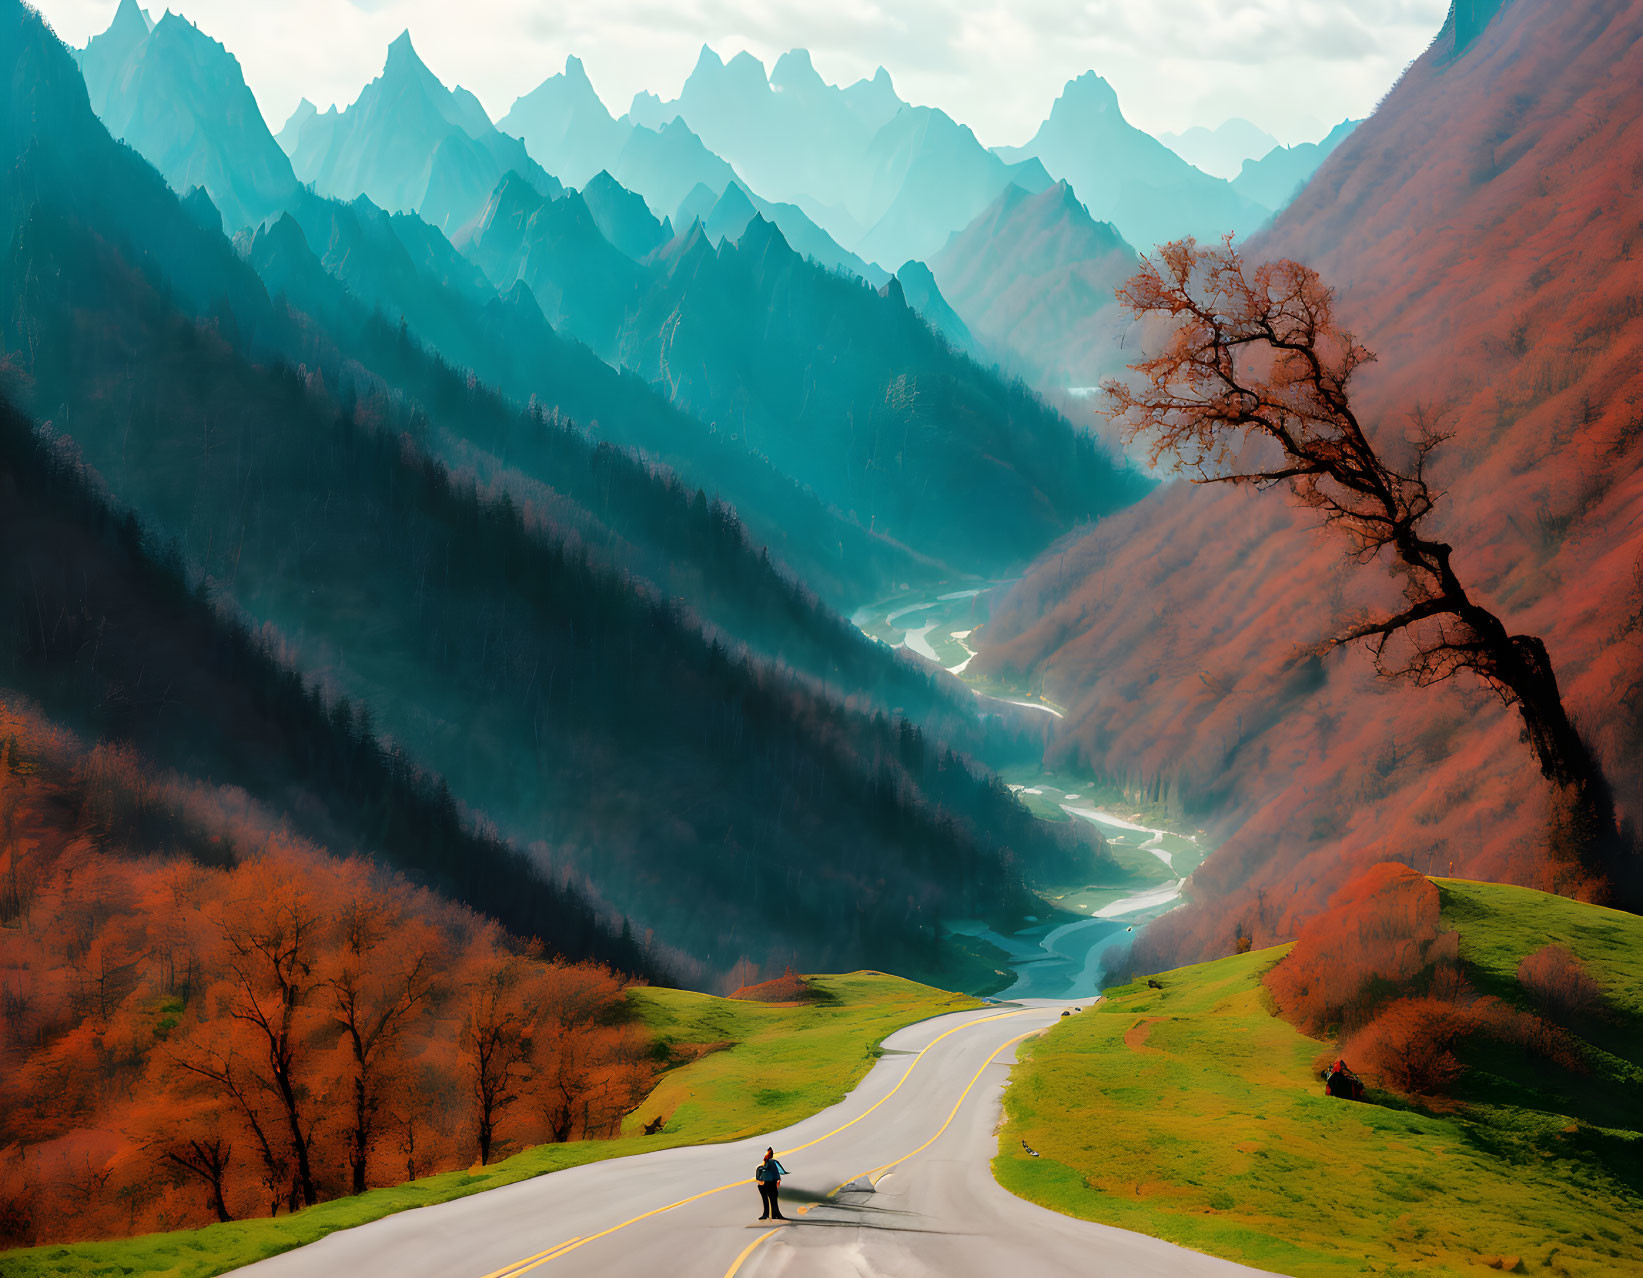 Person walking on winding road among autumn trees and mountains under hazy sky